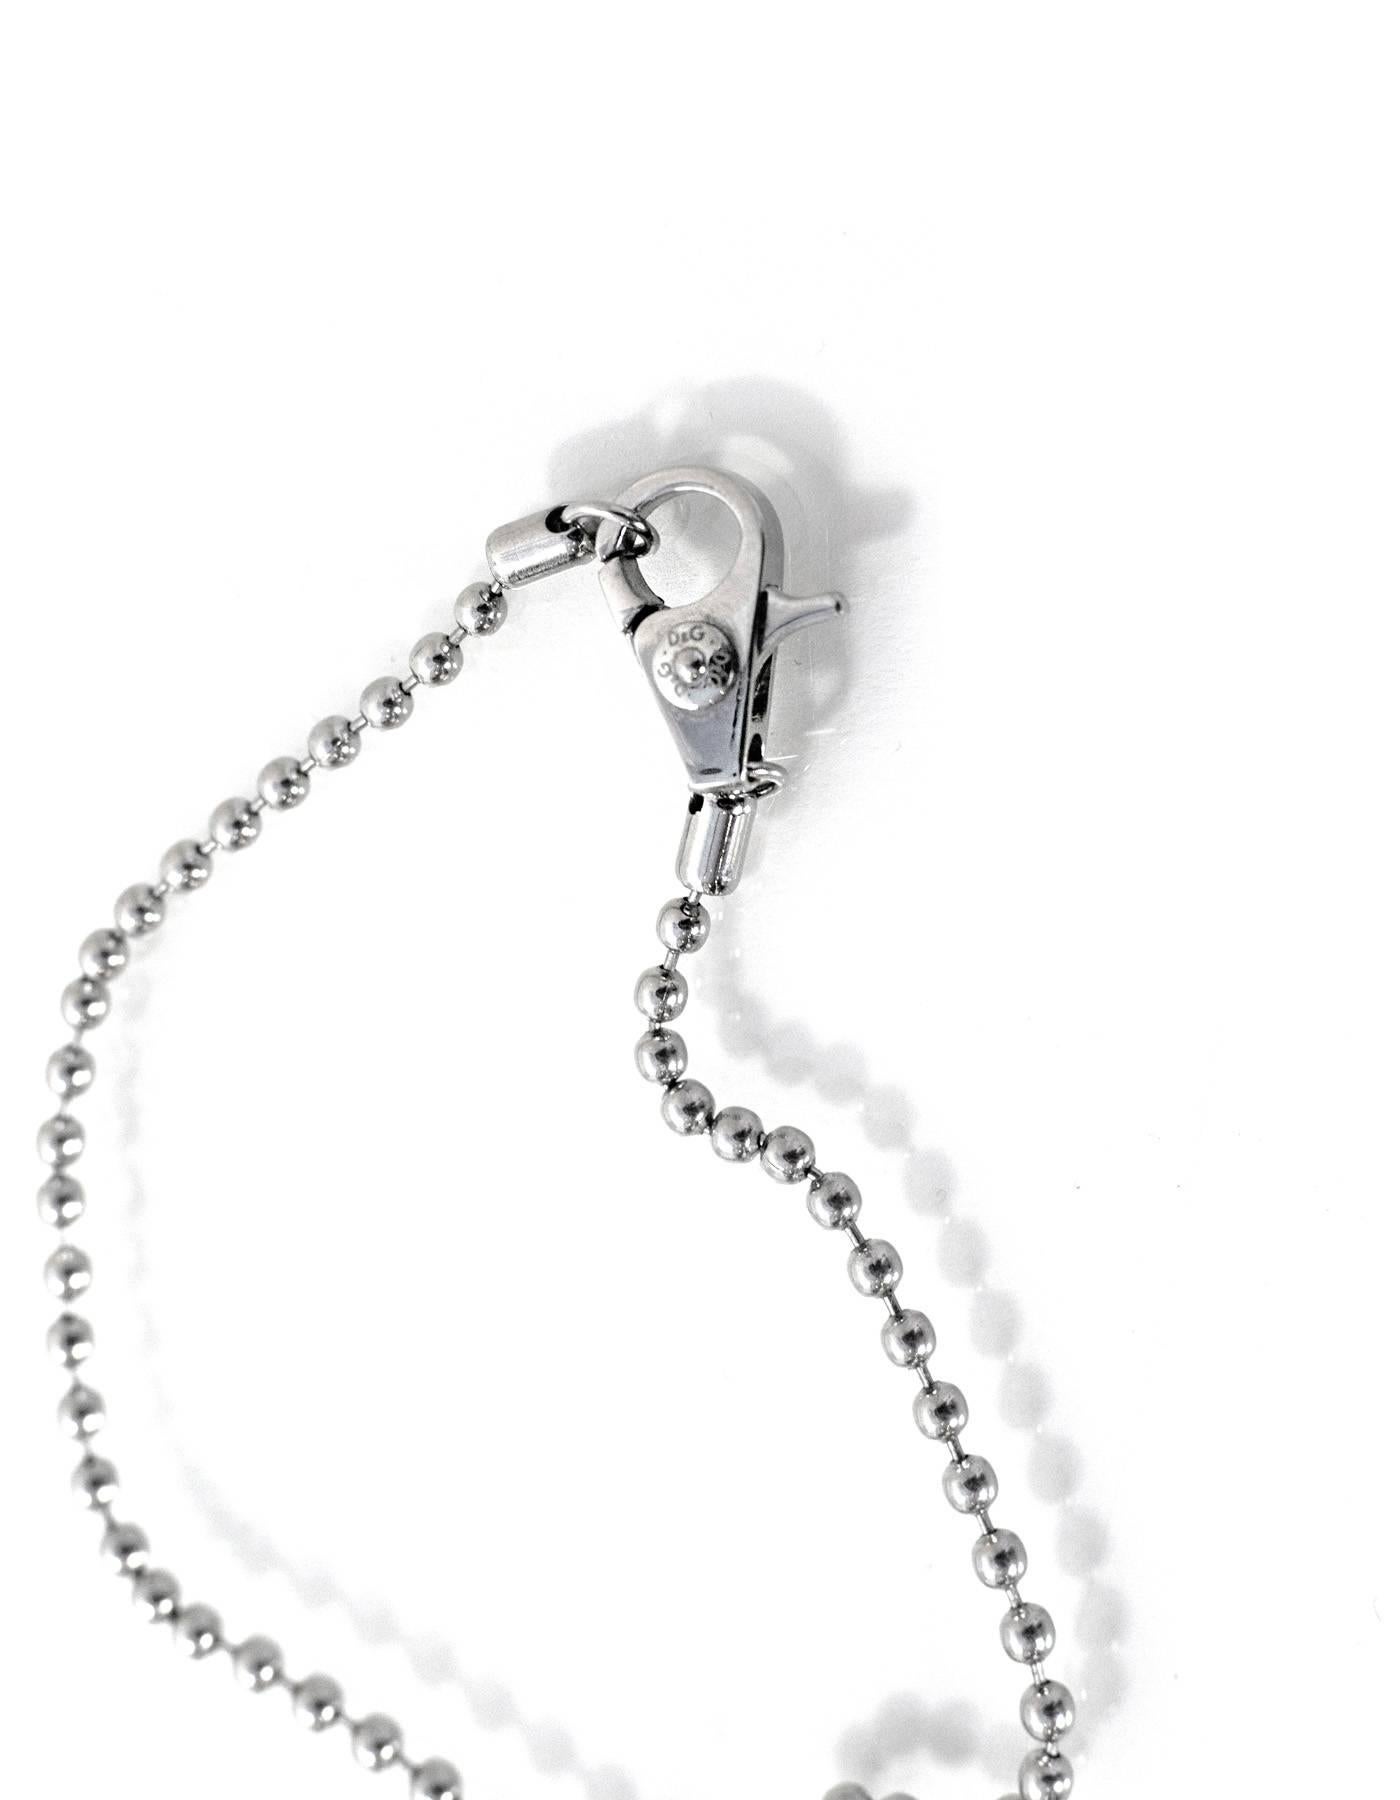 Dolce & Gabbana Silver & White Peace Sign Necklace
Features small screws detailing pendant with D&G stamped and white enamel

Color: Silvertone and white
Materials: Metal and enamel
Closure: Lobster claw clasp
Stamp: D&G
Overall